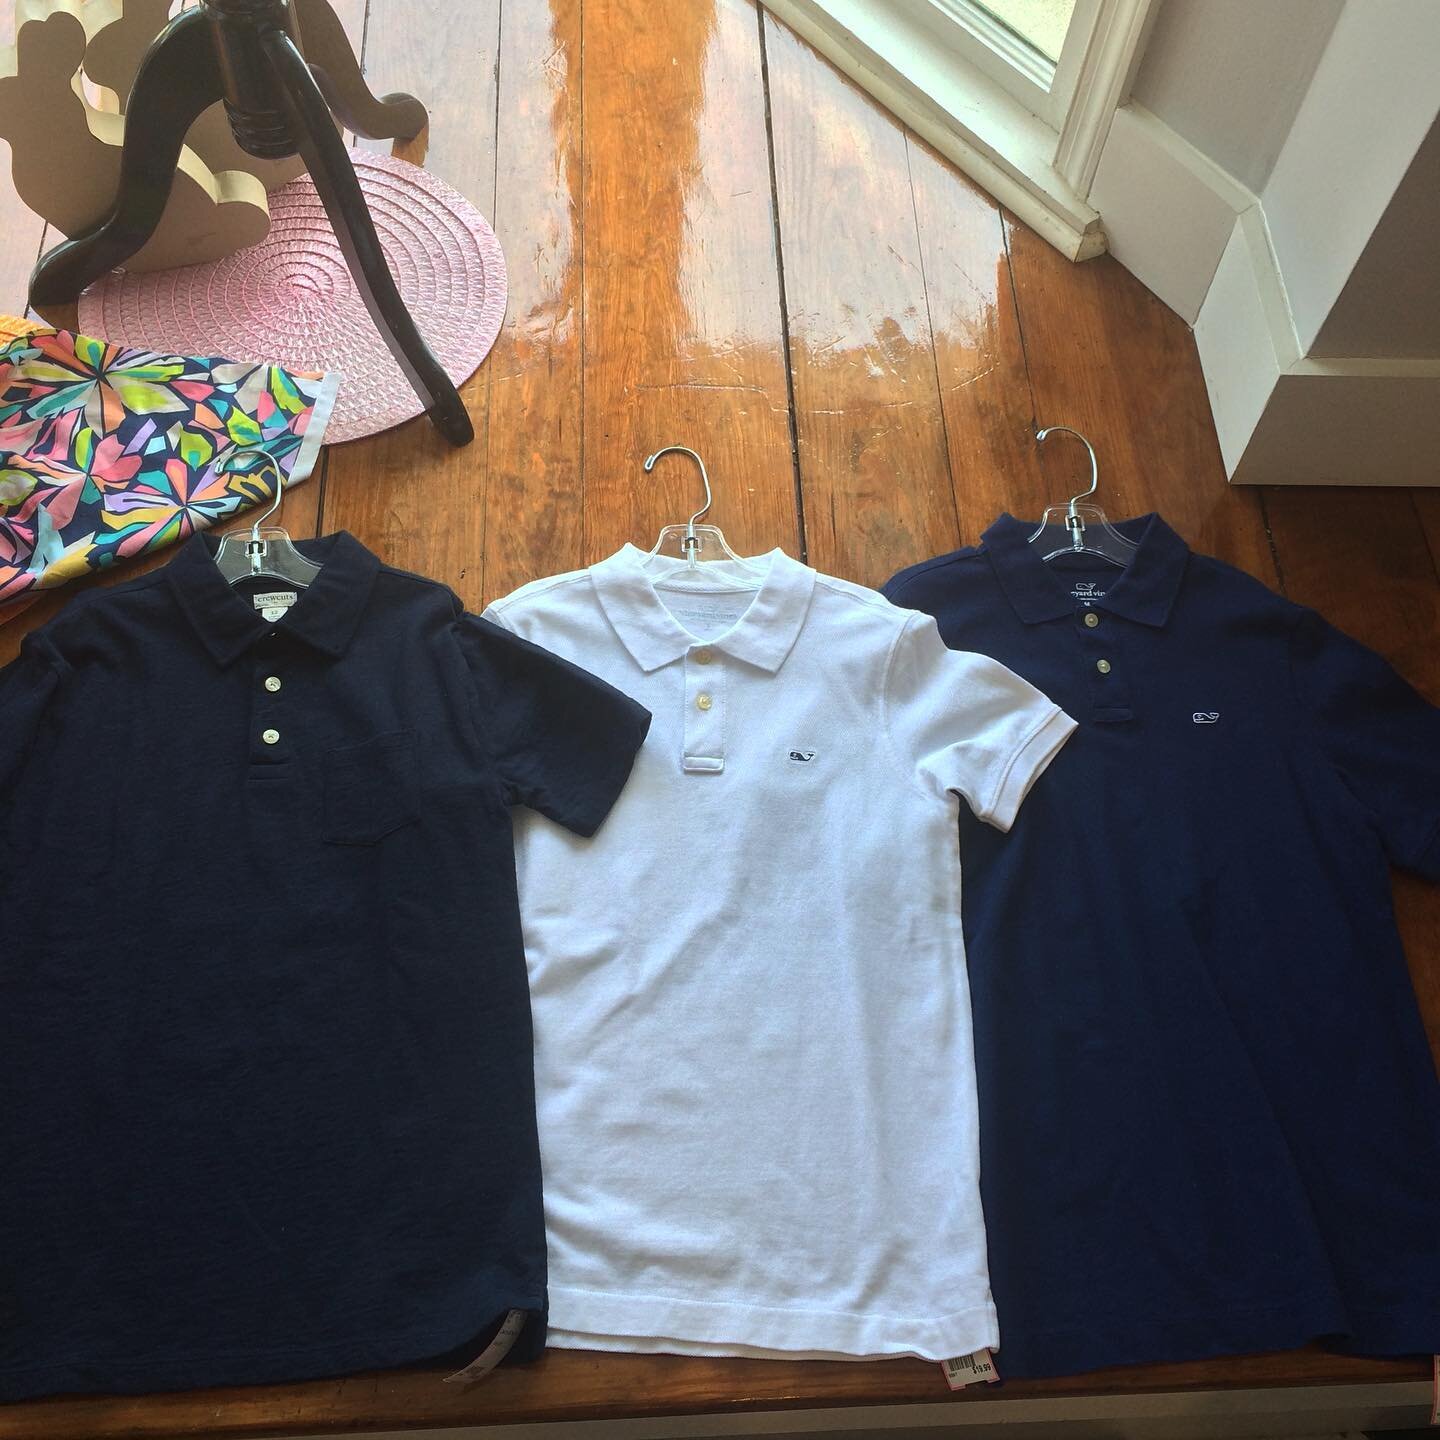 Boy&rsquo;s polos! Navy polo with pocket on left is #crewcuts size 12 &amp; $14.99. #vineyardvines white polo size 8/10 &amp; $19.99. #vineyardvines navy polo on right size 12/14 &amp; $19.99.  #529hh #529hhfaves #529hollinhall #kidsconsignment #cons